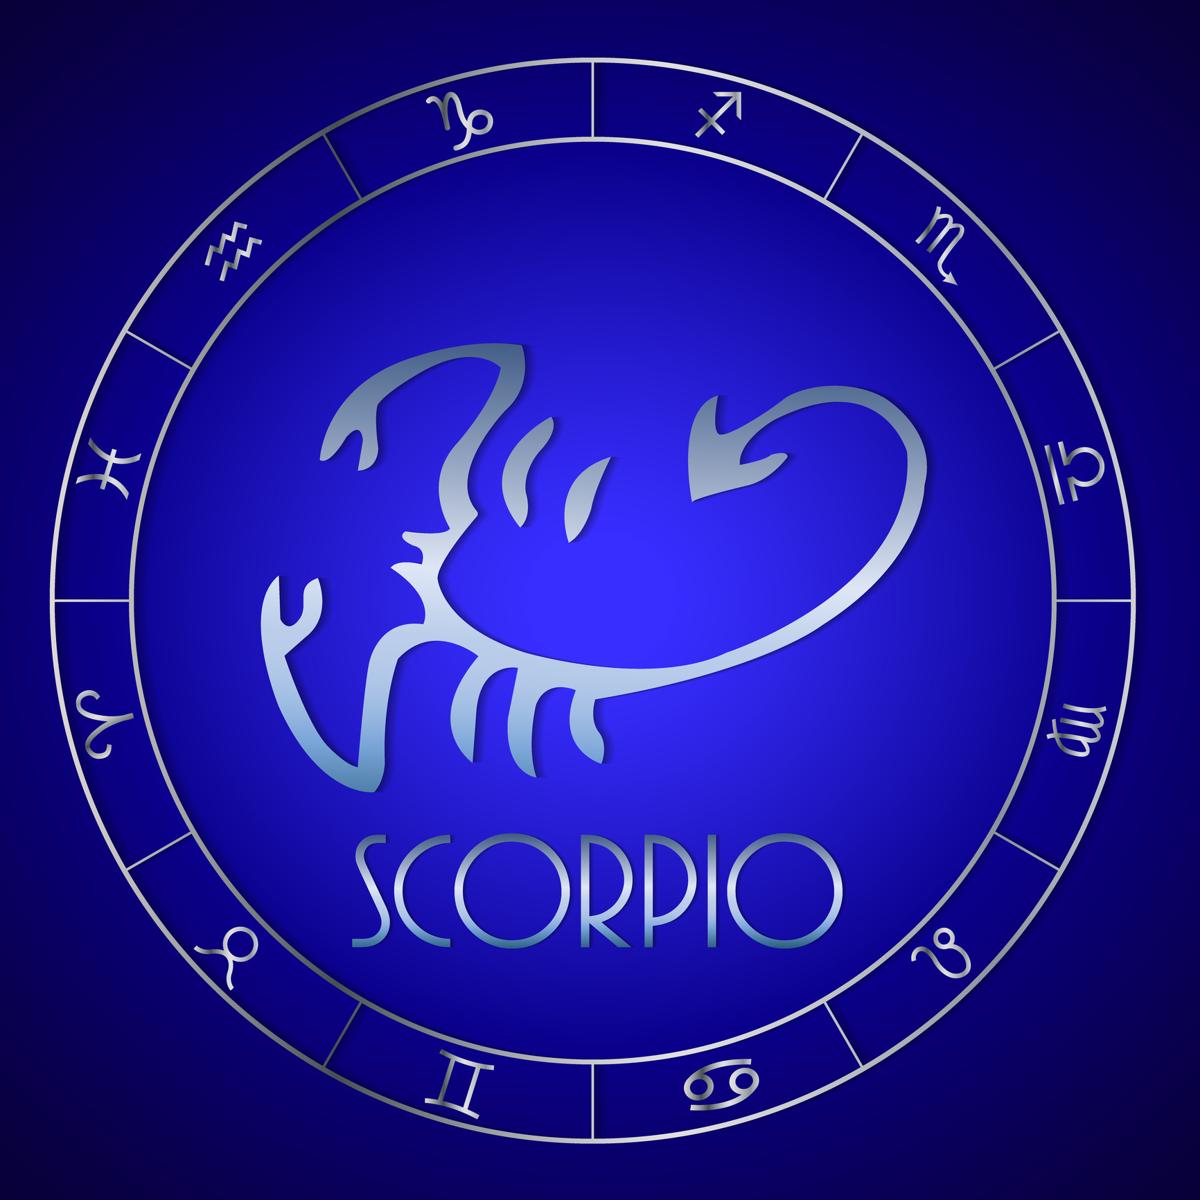 Signs Of The Zodiac Scorpio Traits Of A Scorpio In And The Dos And Don Ts O...